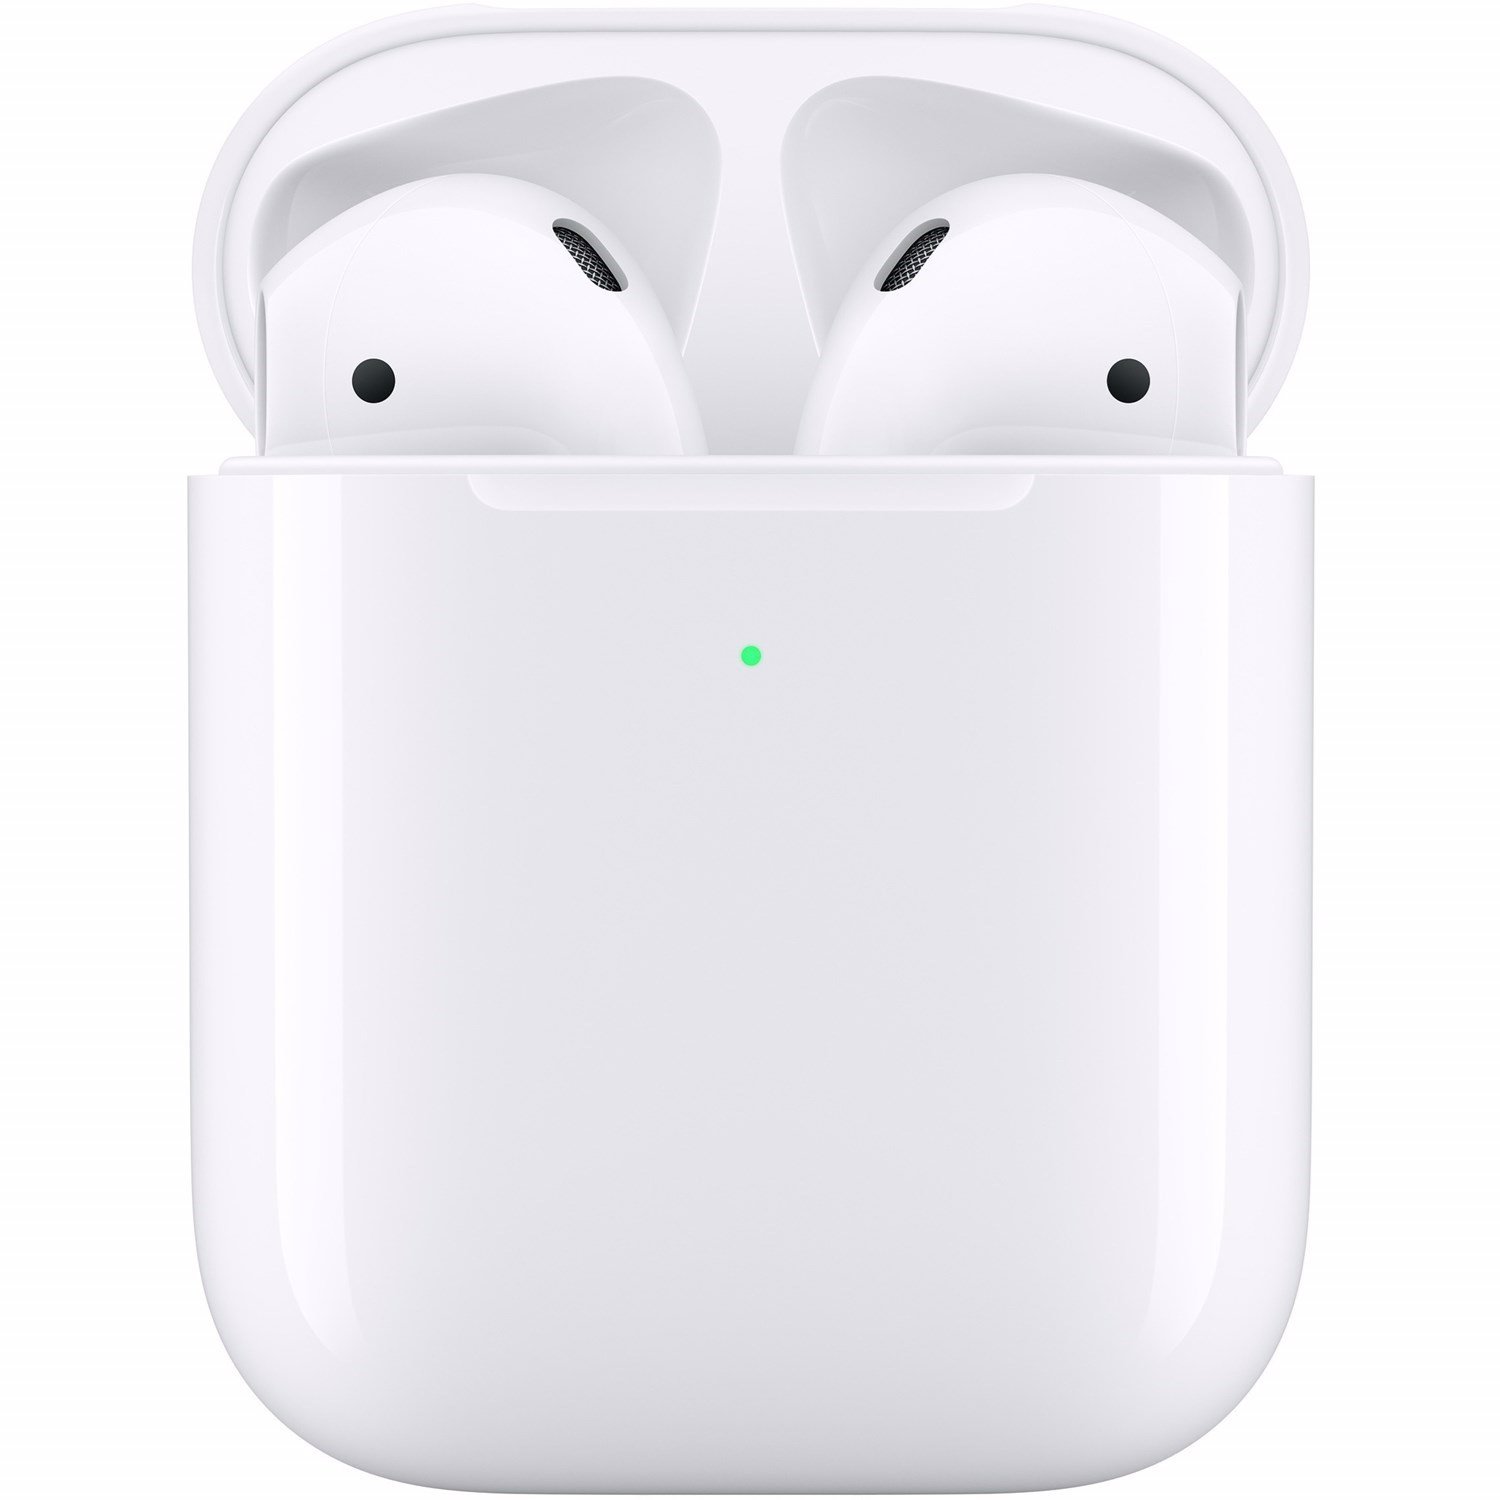 Apple AirPods Wireless Earbud Stereo Earset